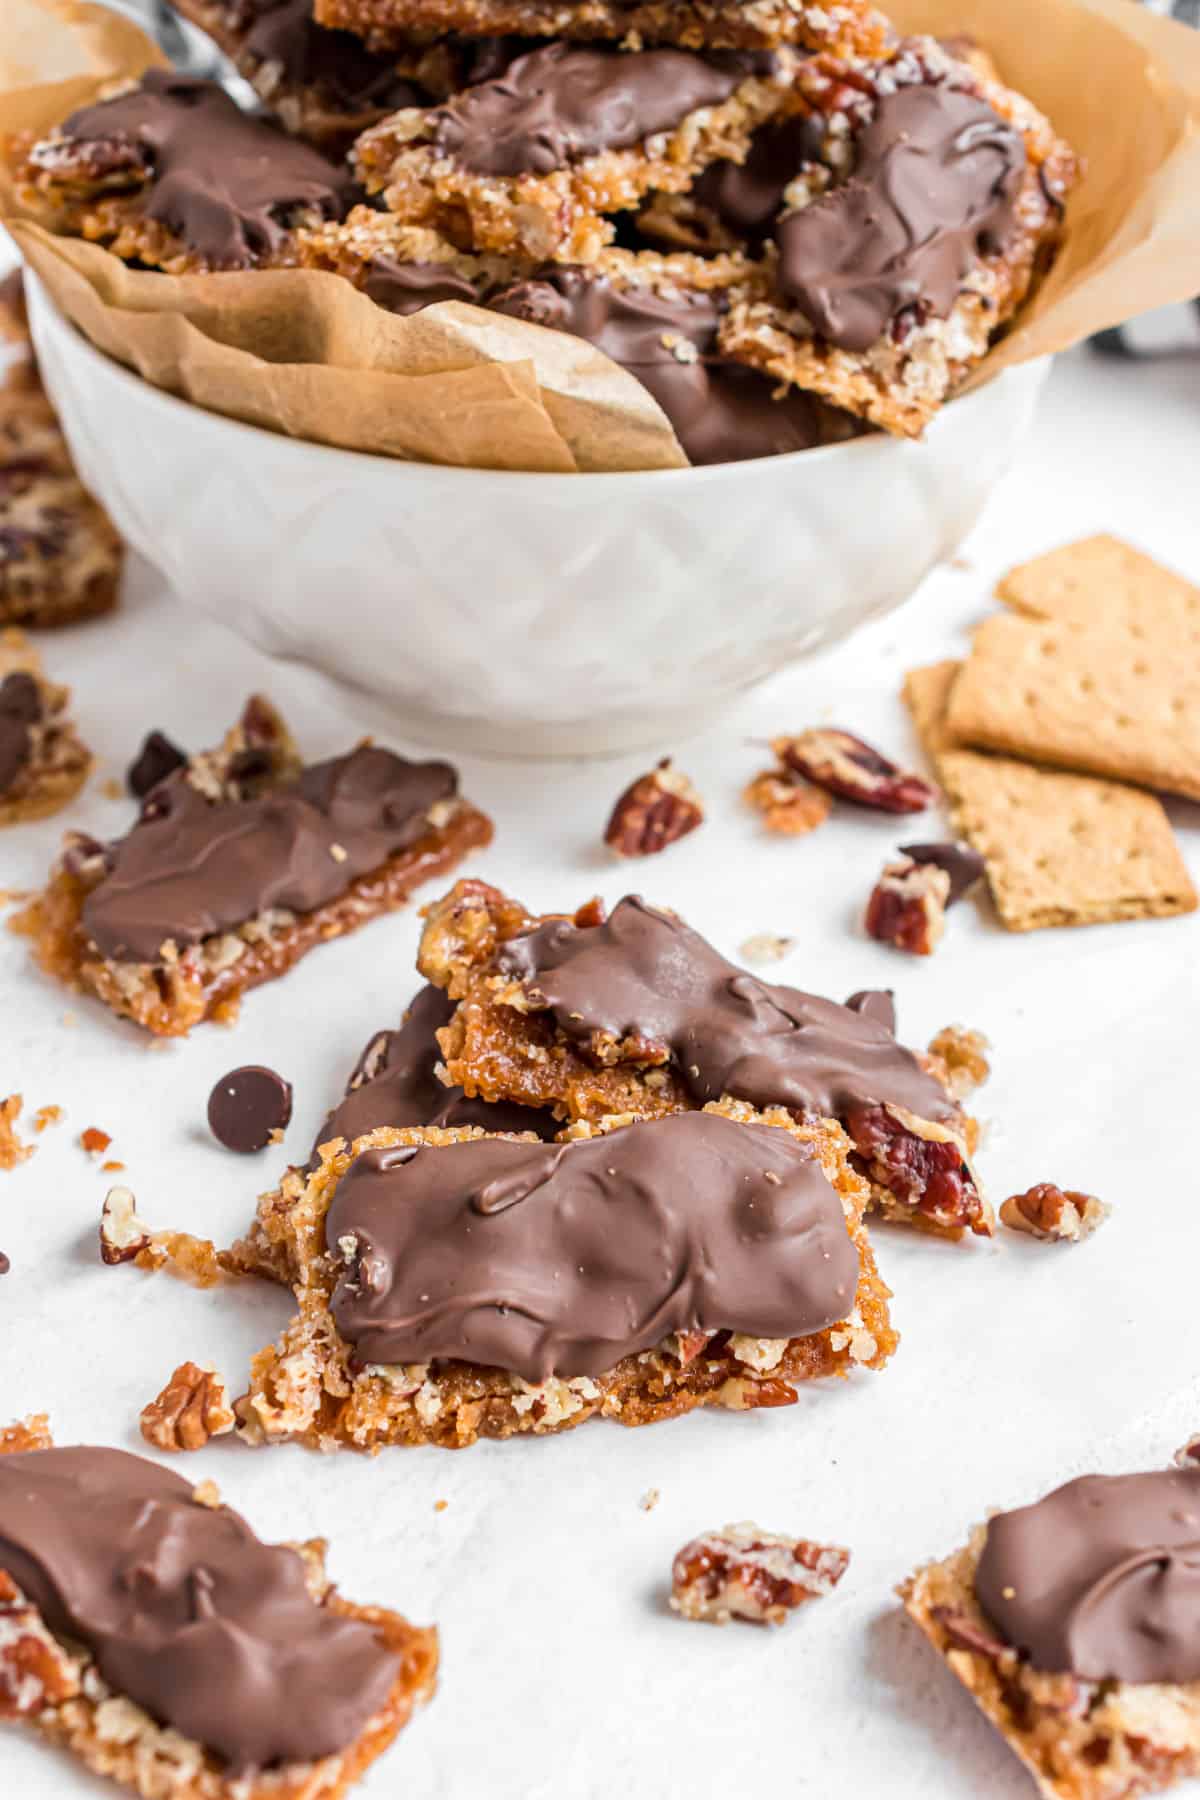 Graham cracker toffee bars on counter, with some in a bowl.